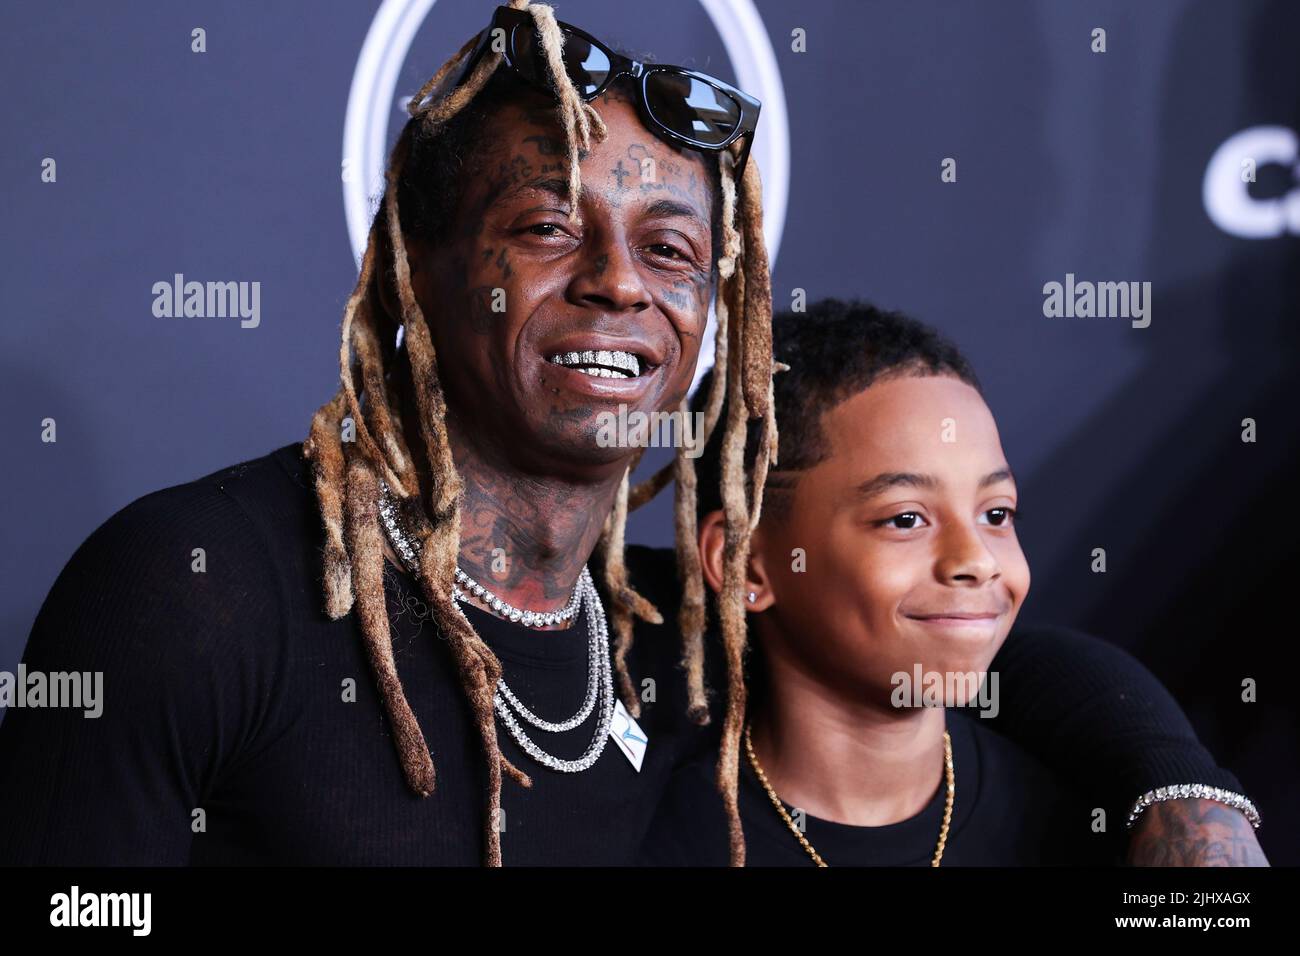 Hollywood, United States. 20th July, 2022. HOLLYWOOD, LOS ANGELES, CALIFORNIA, USA - JULY 20: American rapper Lil Wayne (Dwayne Michael Carter Jr.) and son Kameron Carter arrive at the 2022 ESPY Awards held at the Dolby Theatre on July 20, 2022 in Hollywood, Los Angeles, California, United States. (Photo by Xavier Collin/Image Press Agency) Credit: Image Press Agency/Alamy Live News Stock Photo